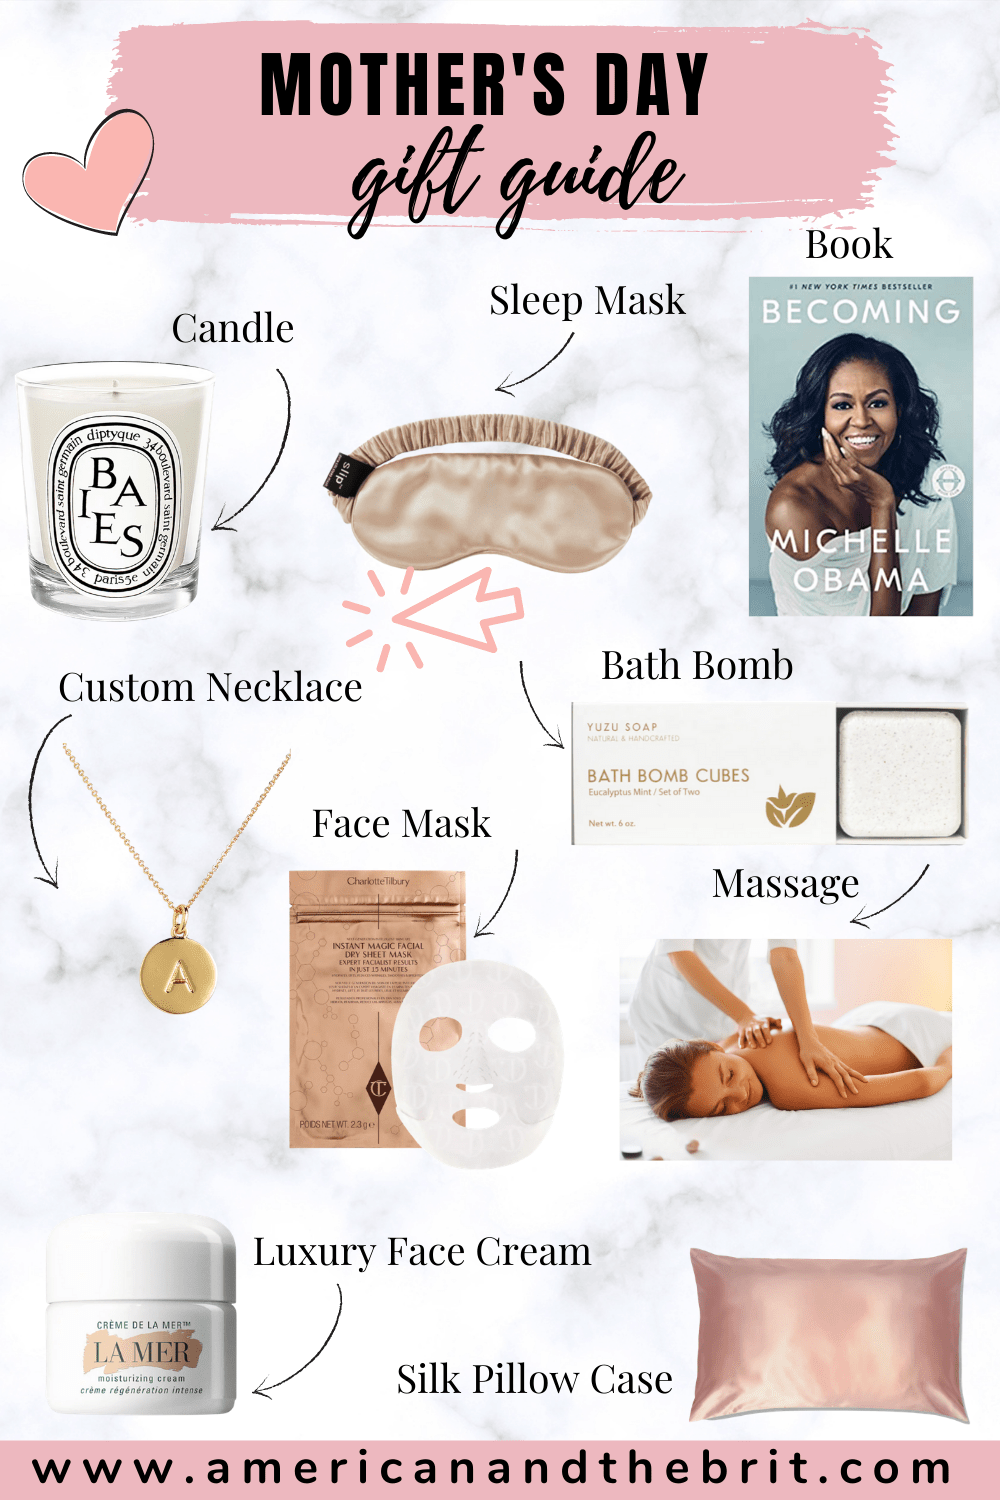 Gift guide for mothers day - gifts